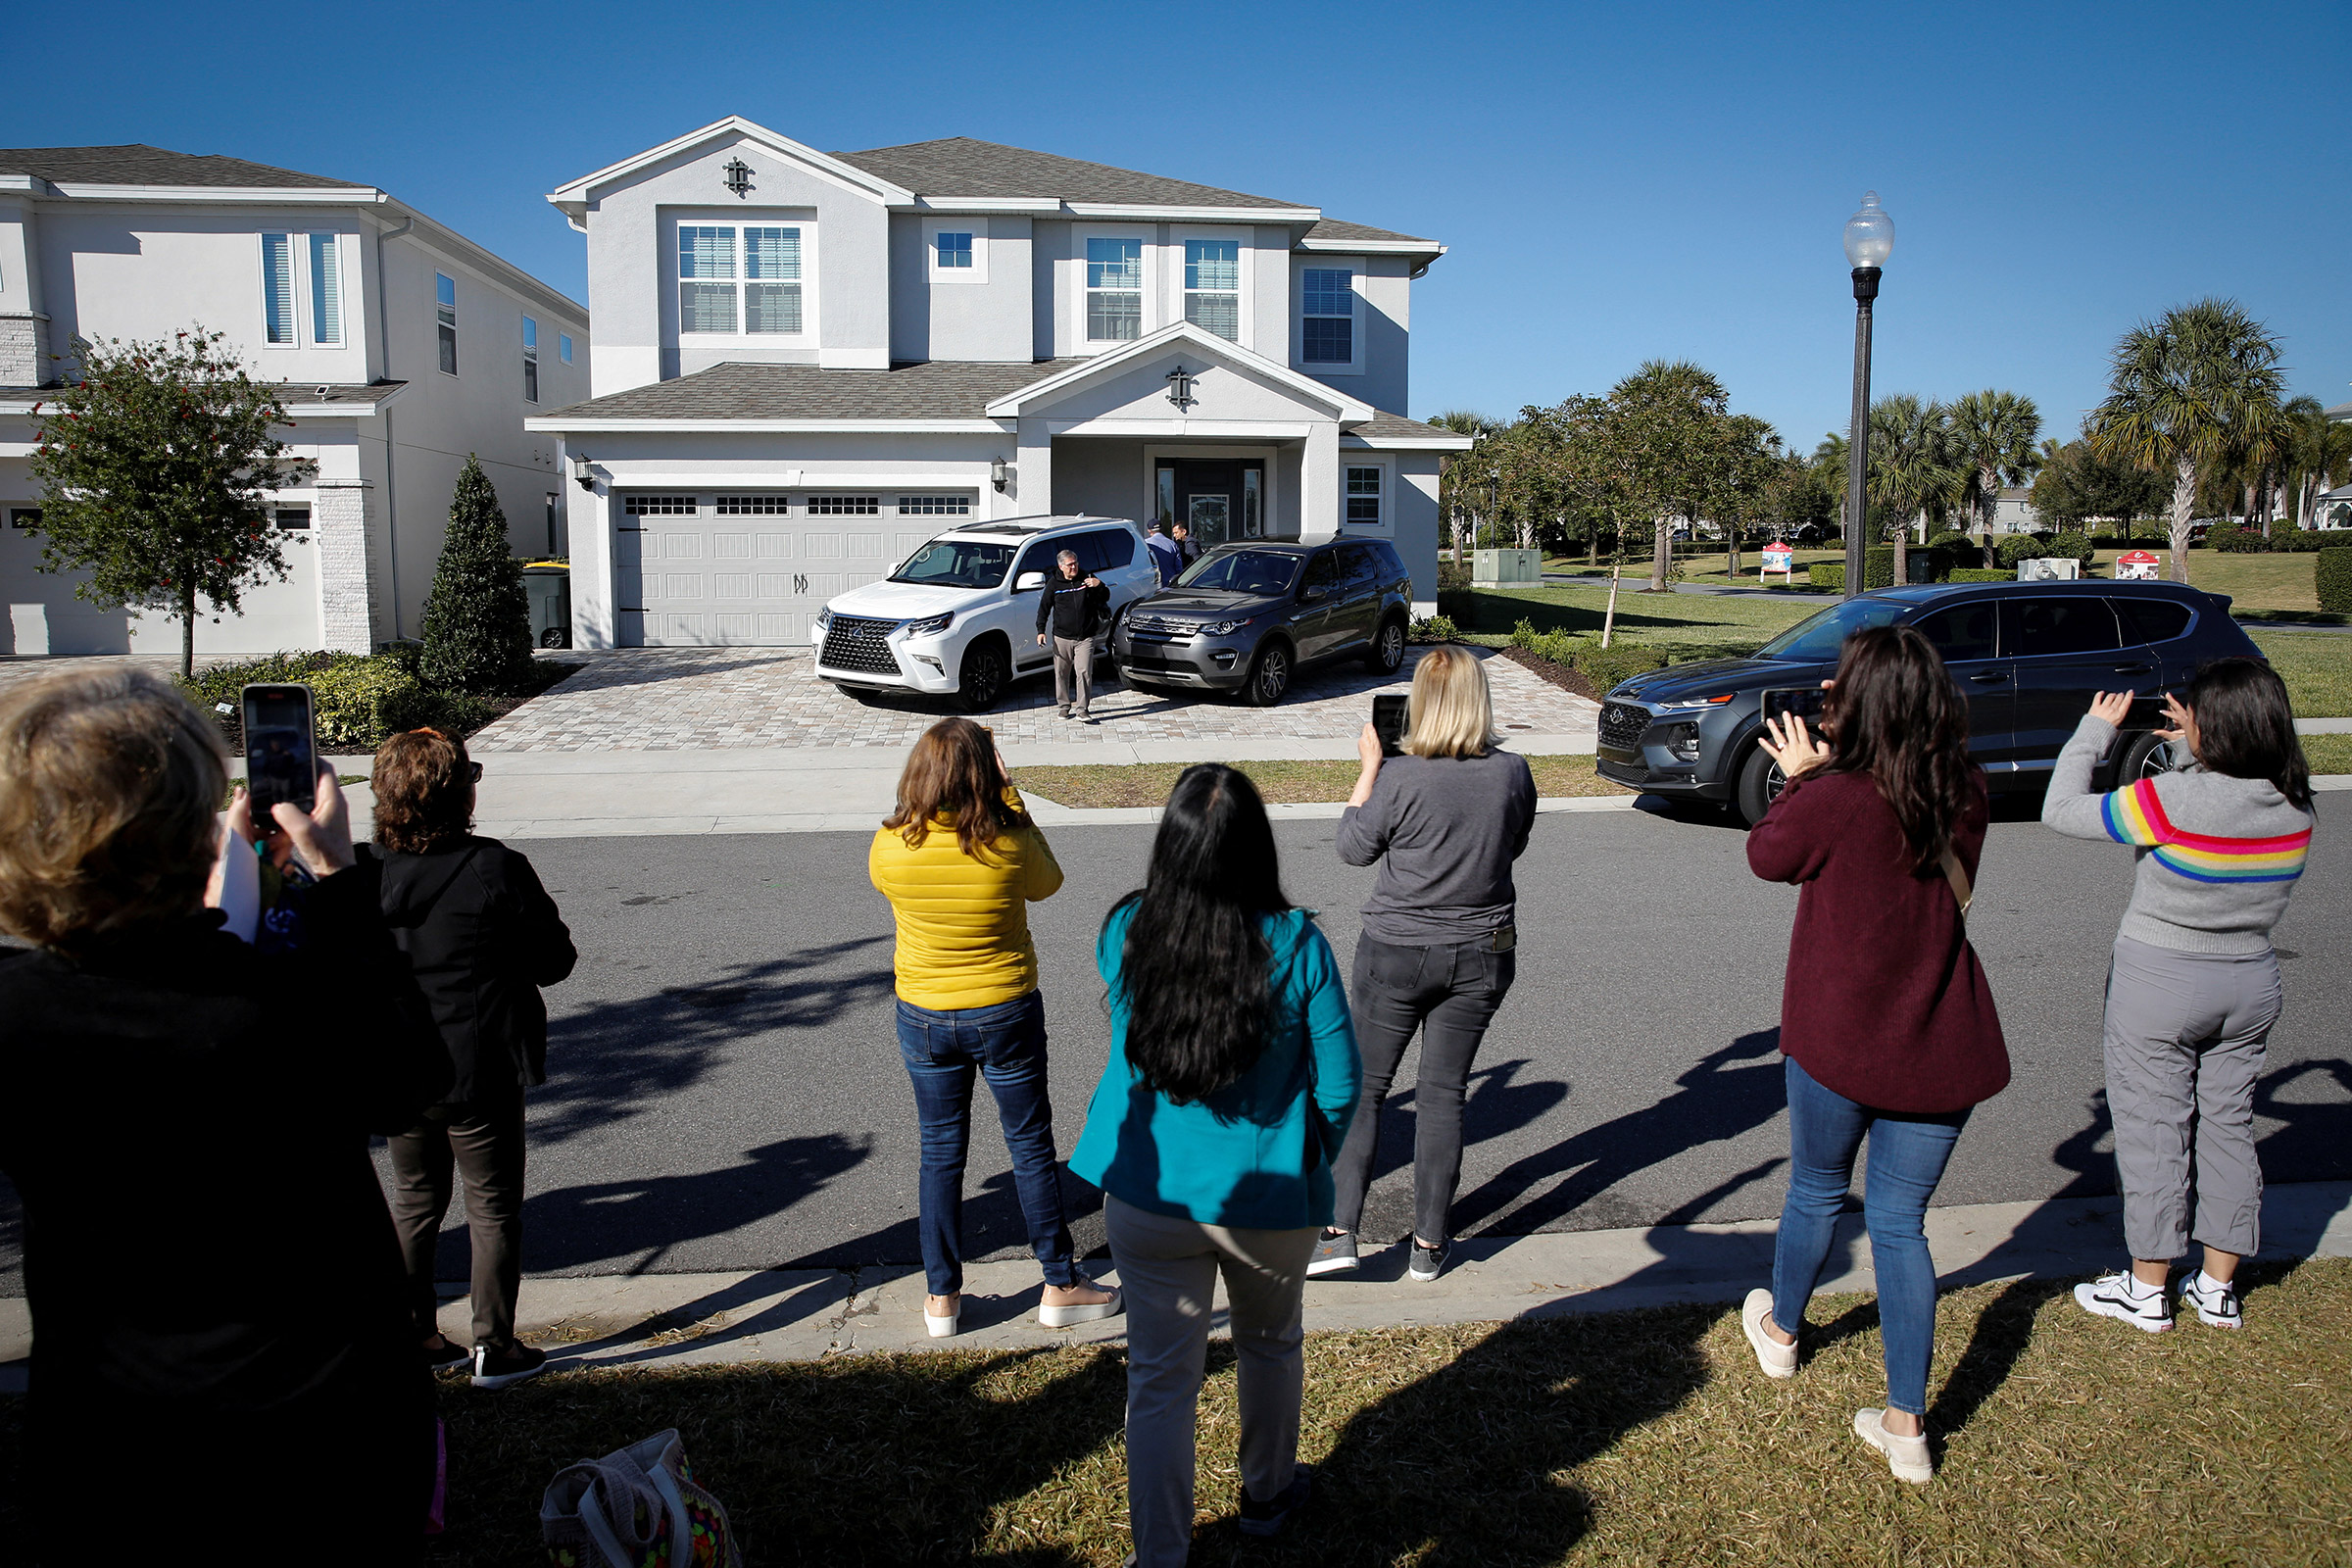 Supporters of former Brazilian President Jair Bolsonaro stand in front of the house he is staying as cardiologist Ricardo Pexoito Camarinha leaves, in Kissimmee, Fla., on Jan. 11, 2023. (Marco Bello—Reuters)